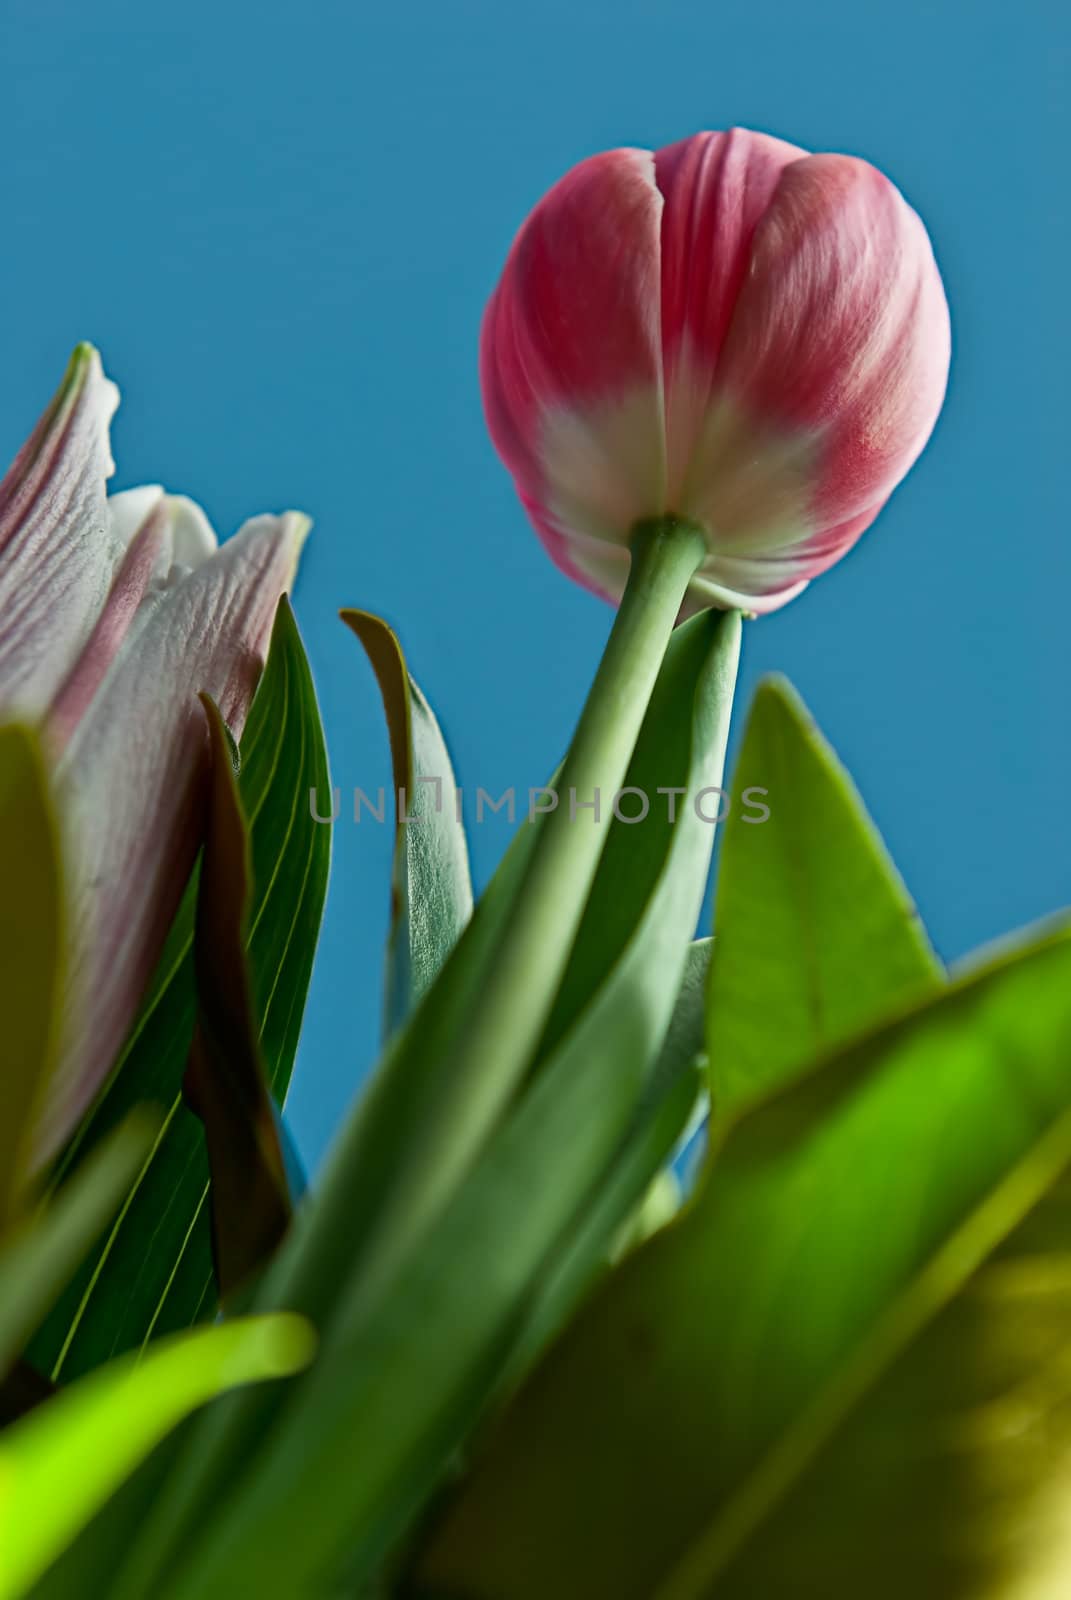 A bunch of flowers with green leaves. Tulips, roses etc. on a blue sky background.